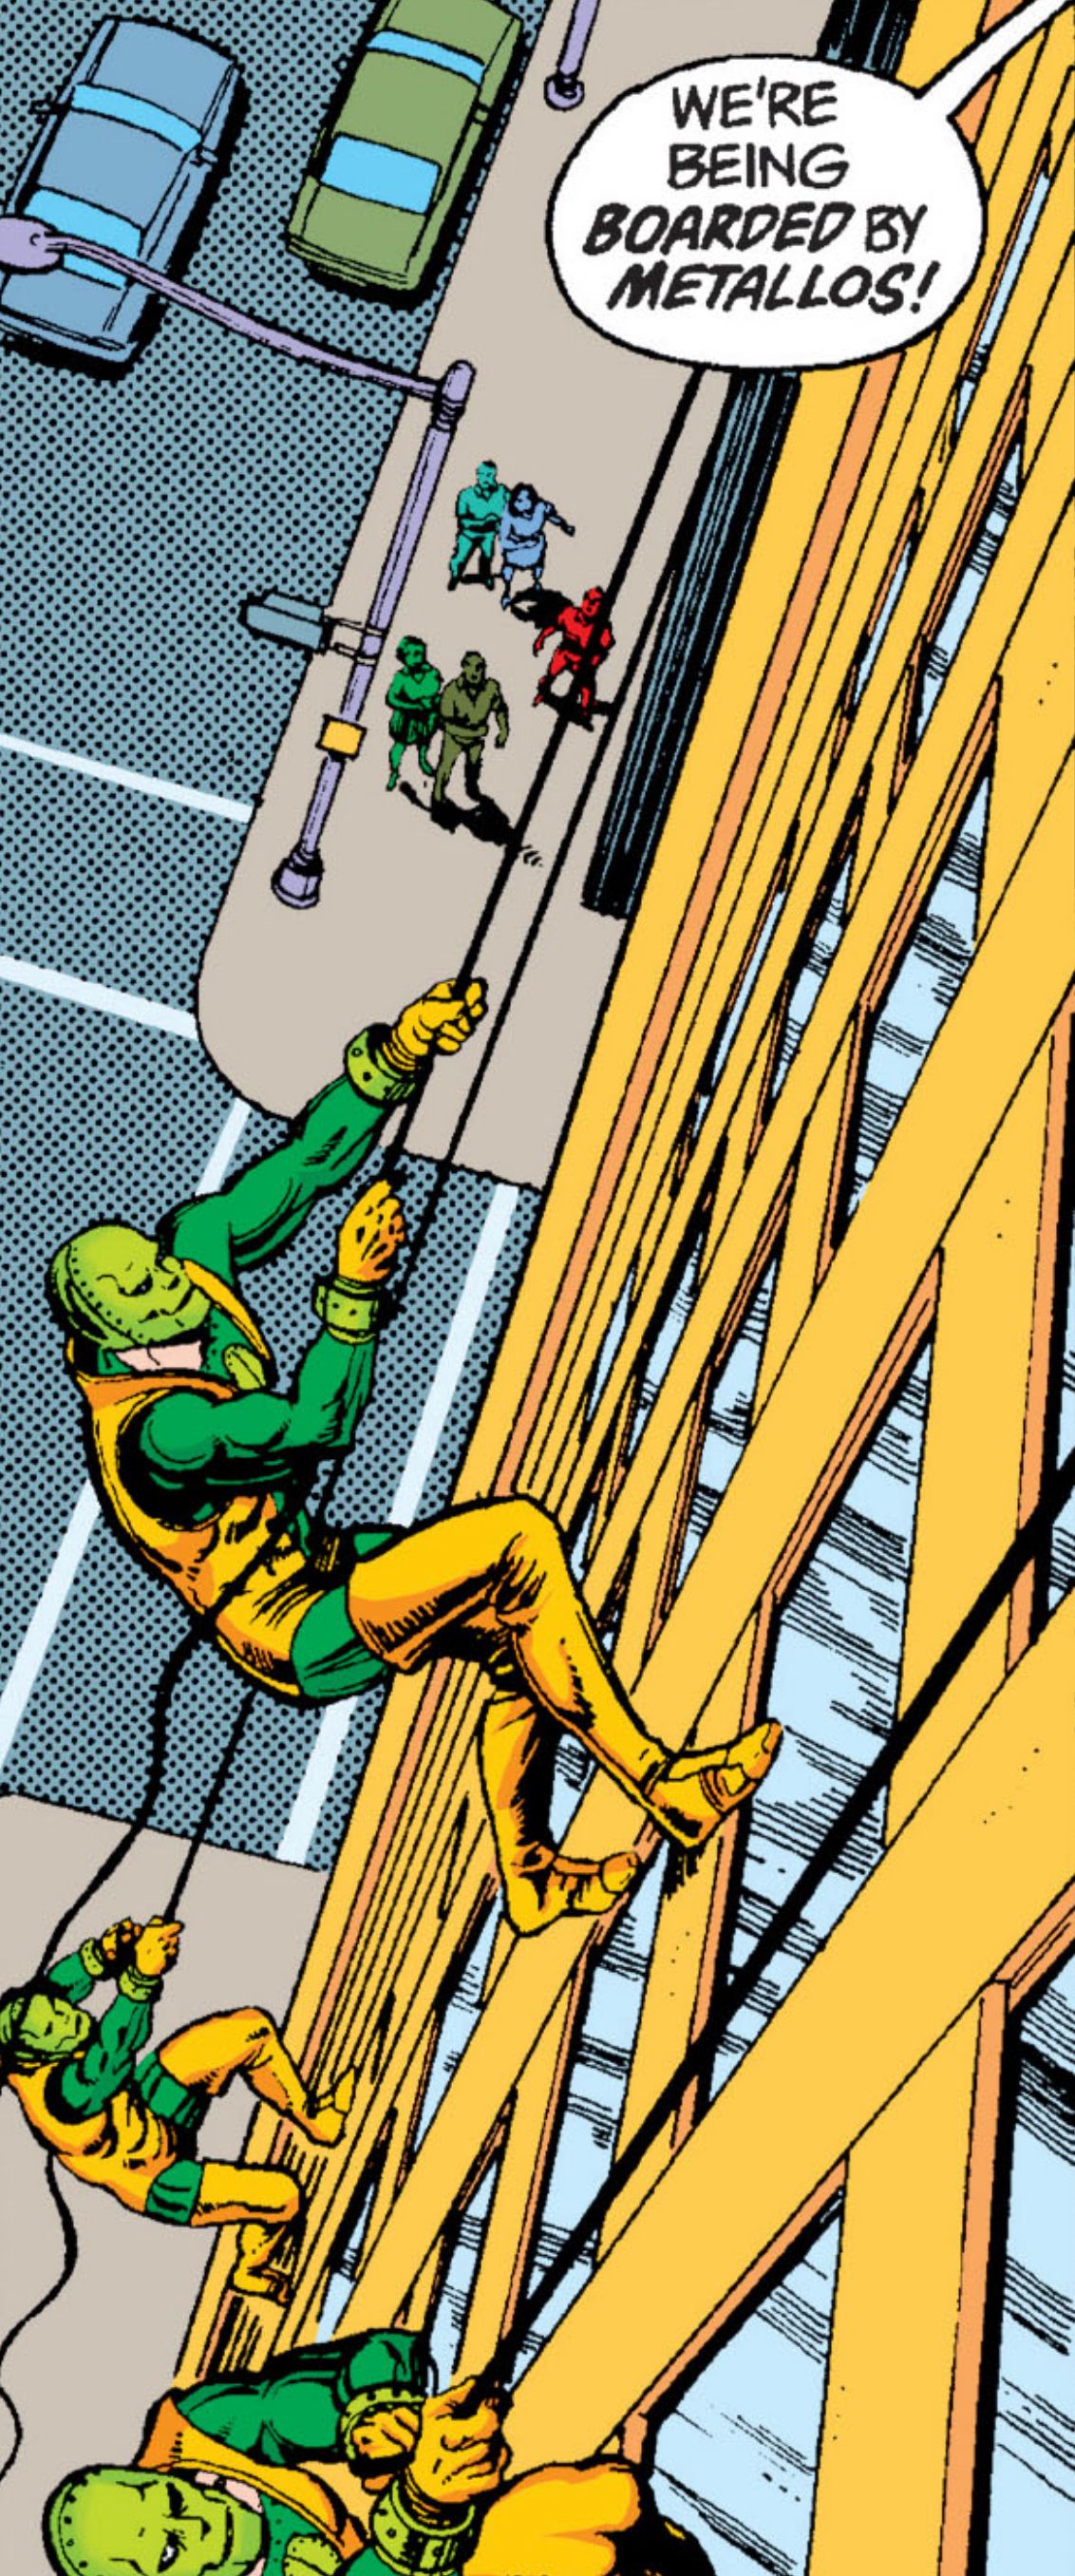 Comic book panel from Superman #423. Several of the pre-crisis orange and green Metallos are climbing up the side of the Daily Planet building on a rope. There is a speech bubble that says “We’re being boarded by Metallos!”